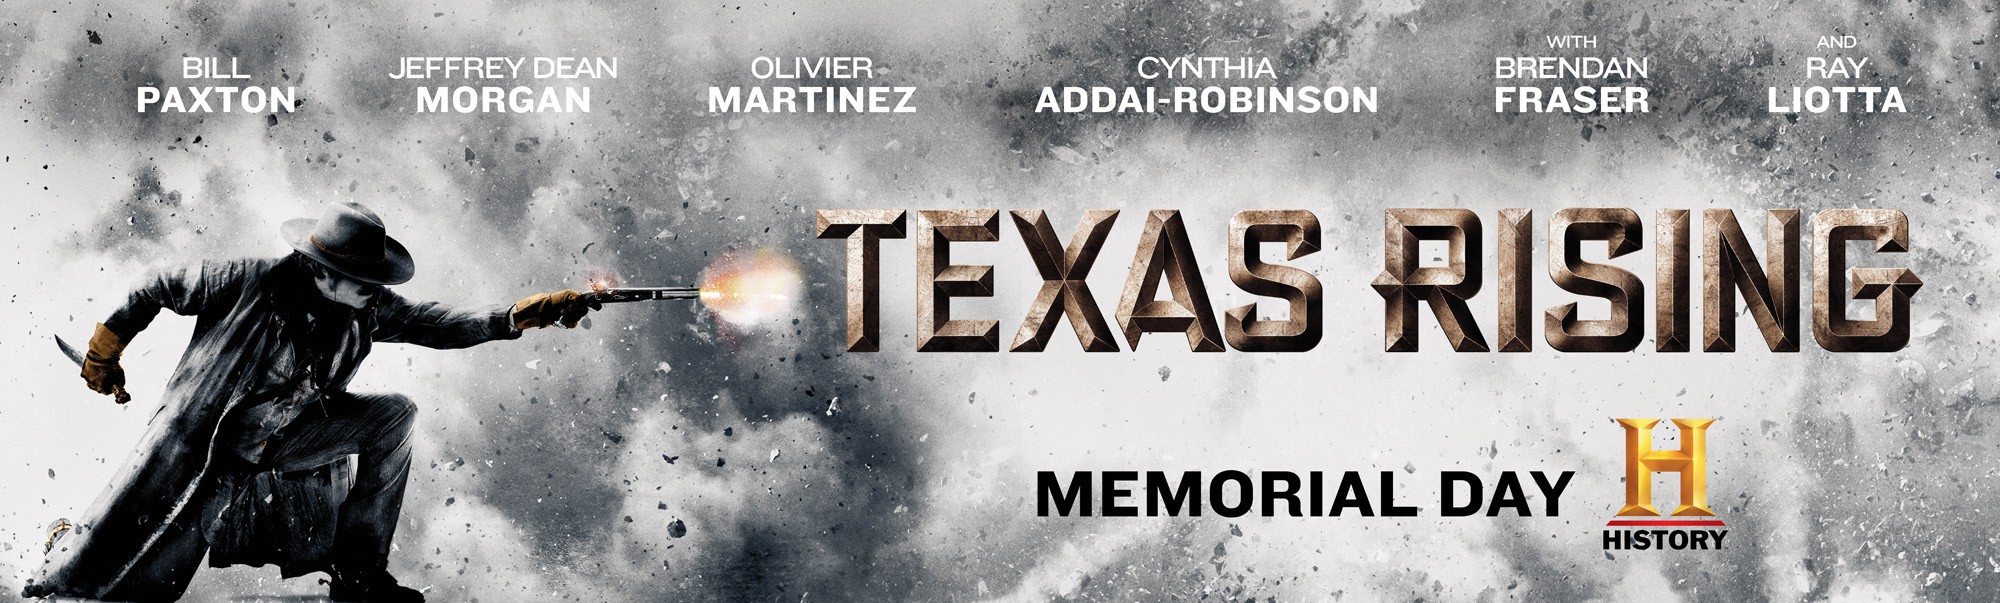 Mega Sized TV Poster Image for Texas Rising (#9 of 17)